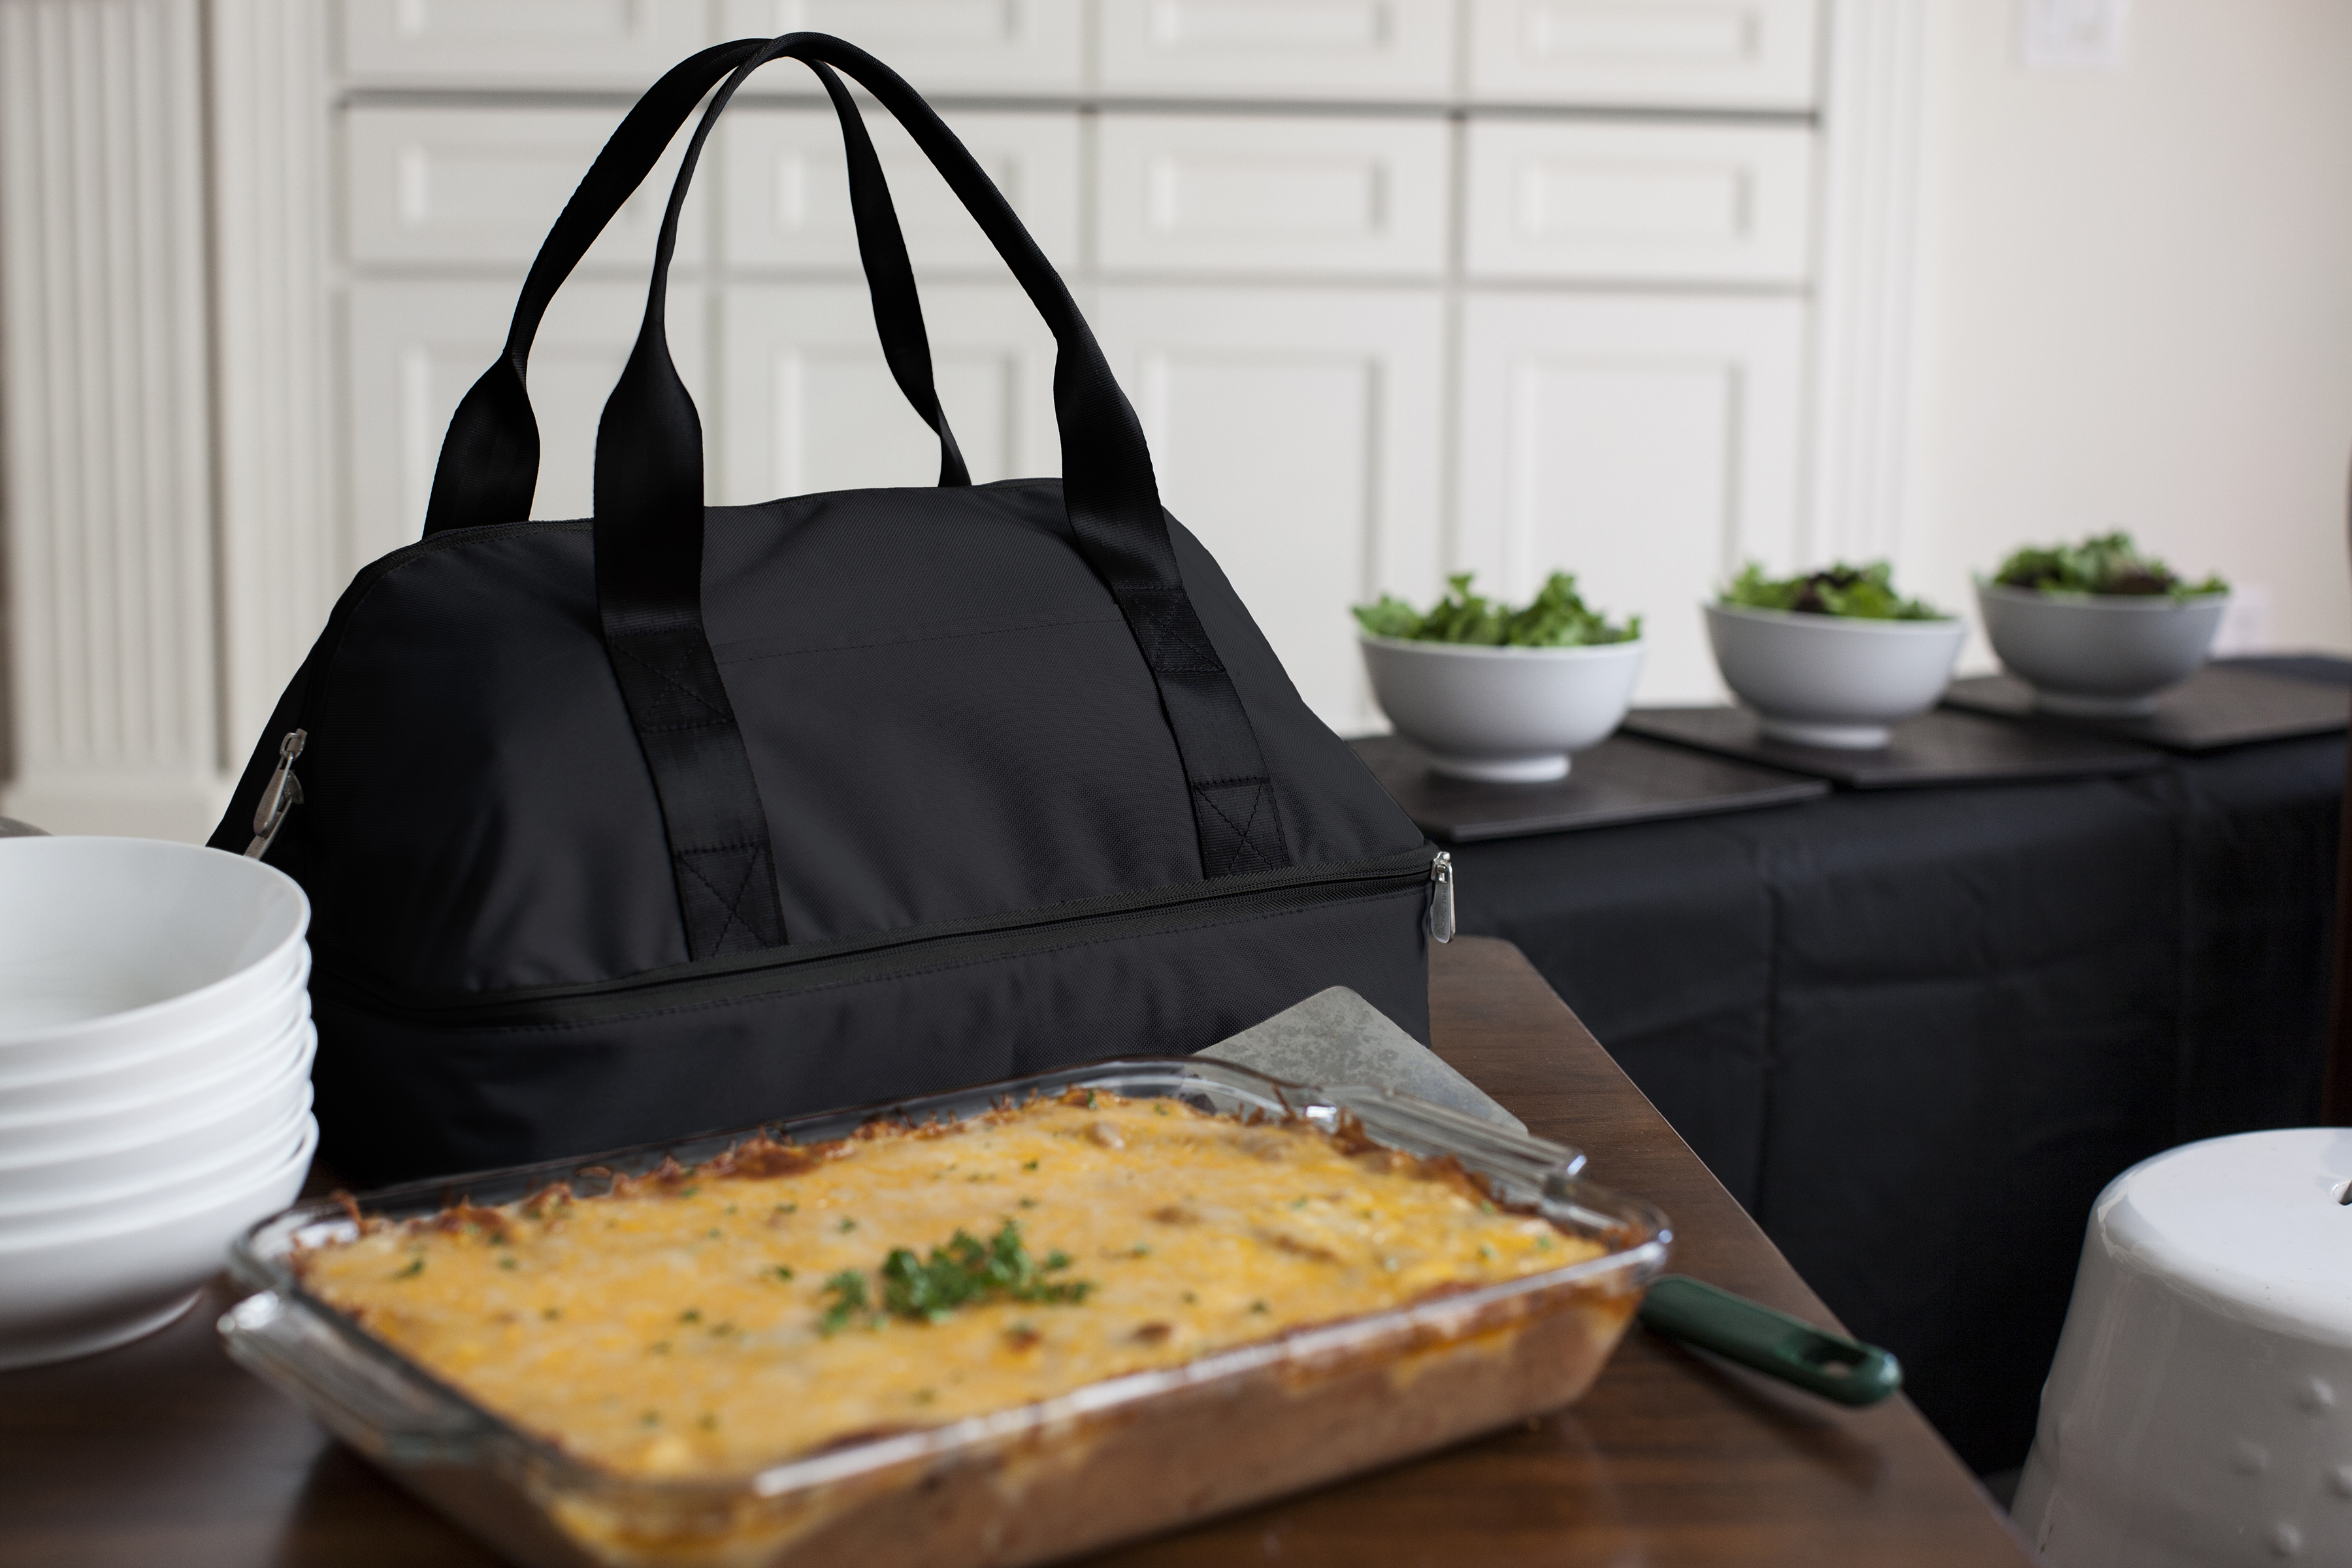 App State Mountaineers - Potluck Casserole Tote